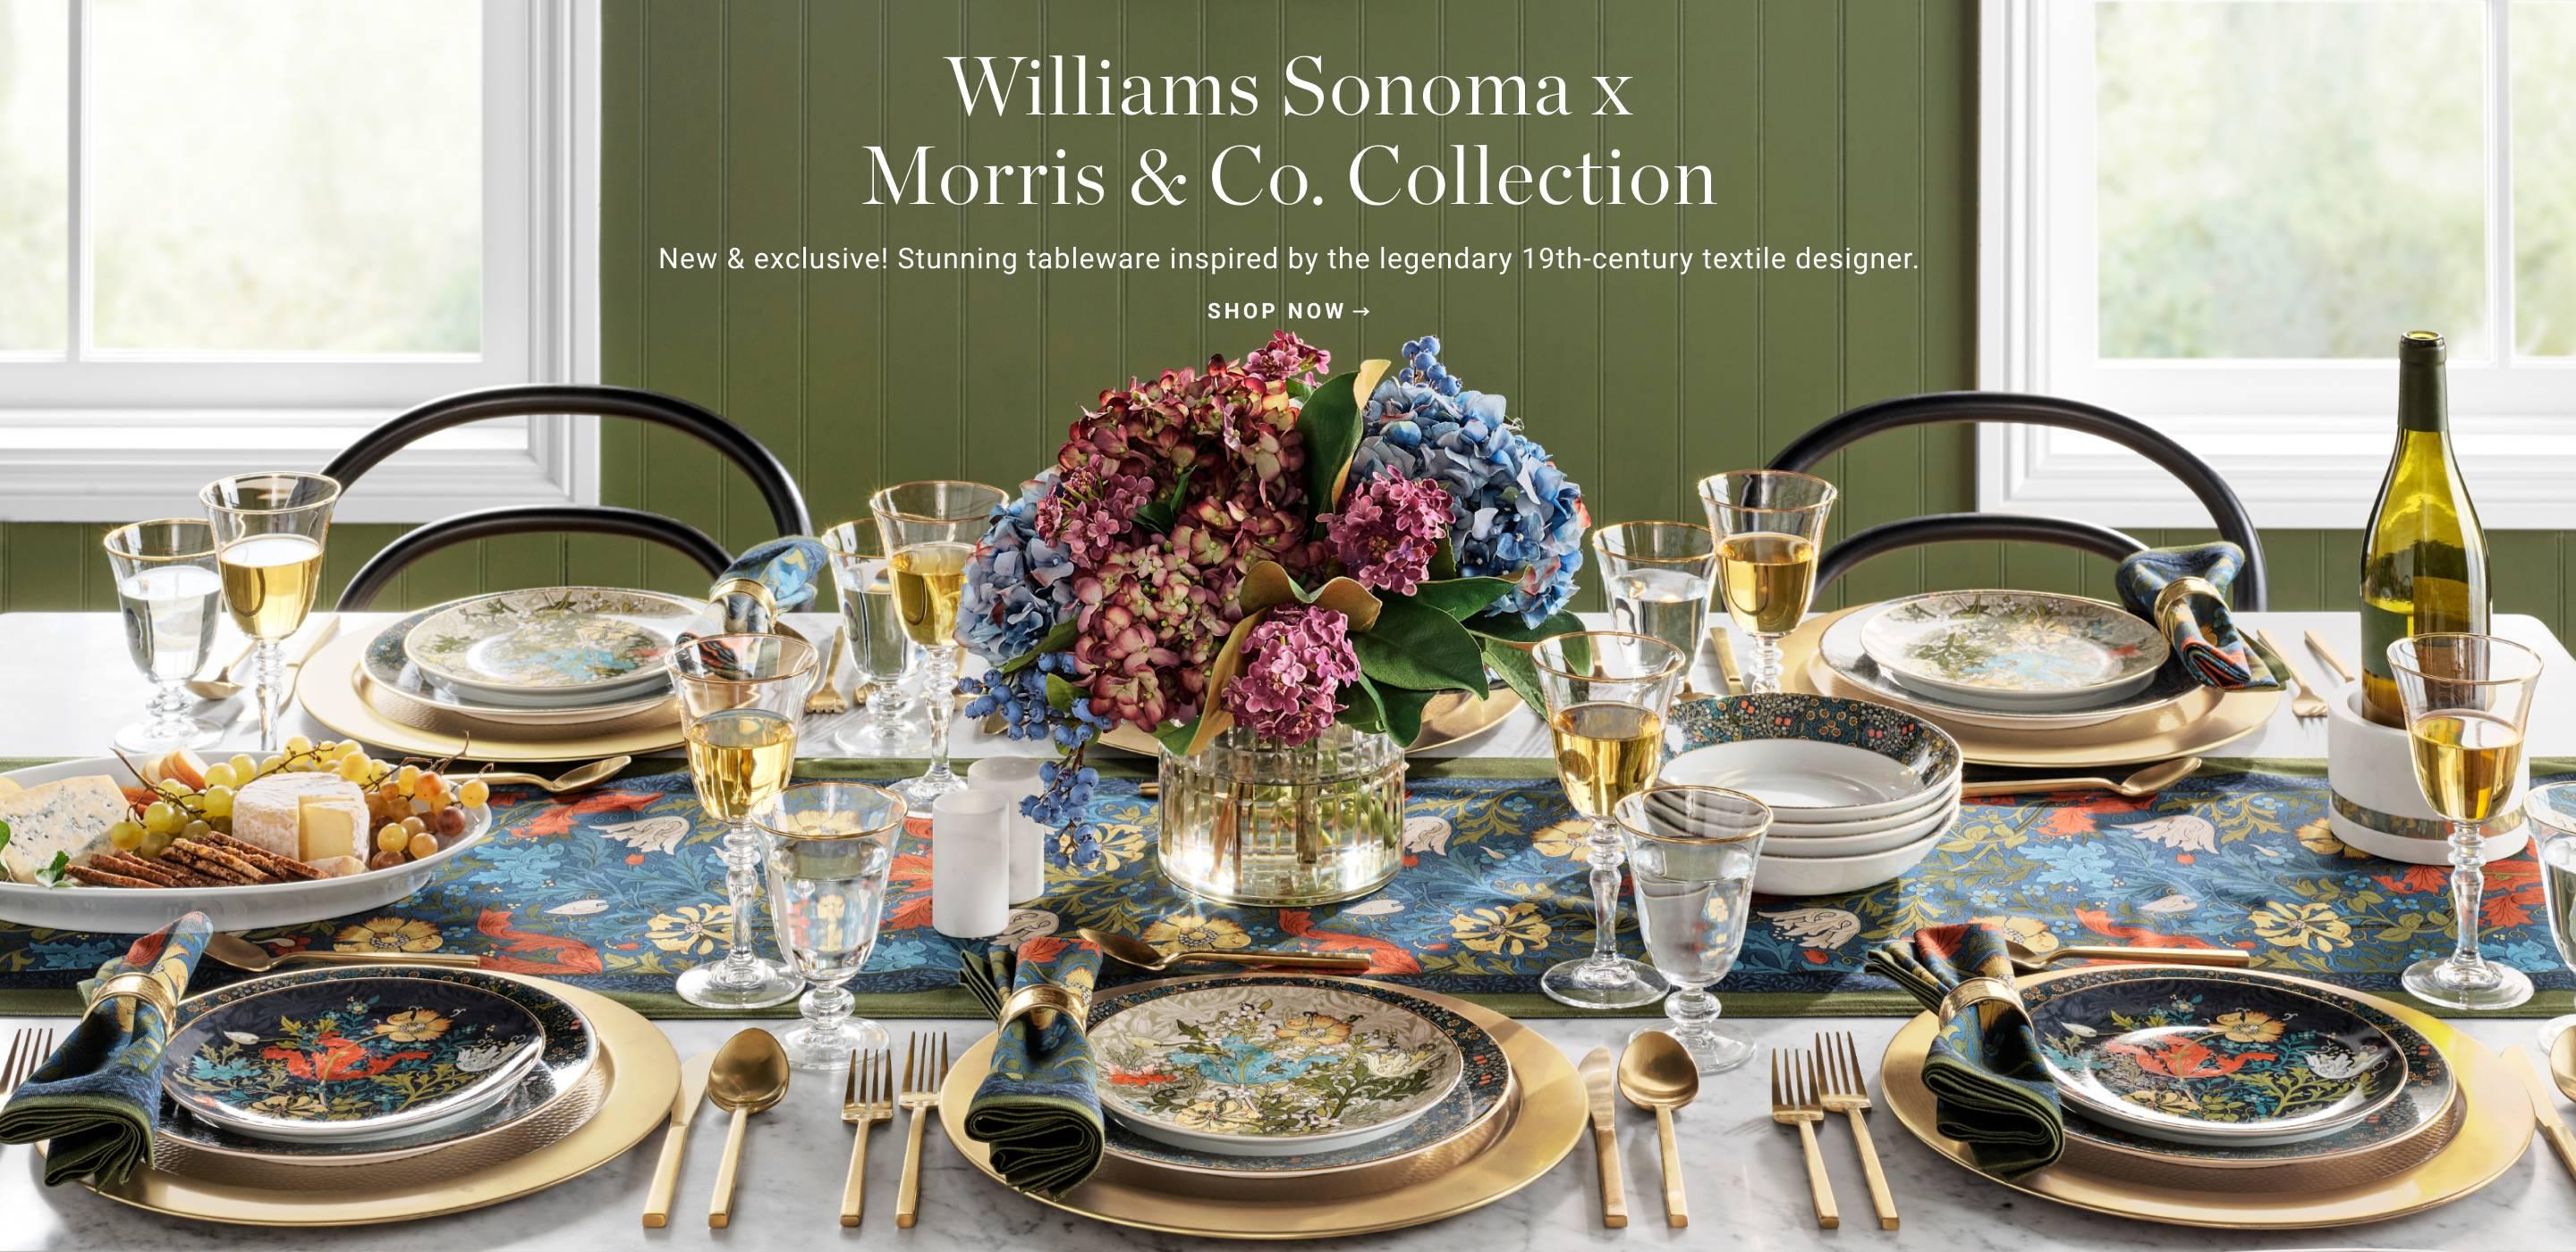 Williams Sonoma x Morris & Co. Collection | New & exclusive! Stunning tableware inspired by the legendary 19th-century textile designer. | Shop Now